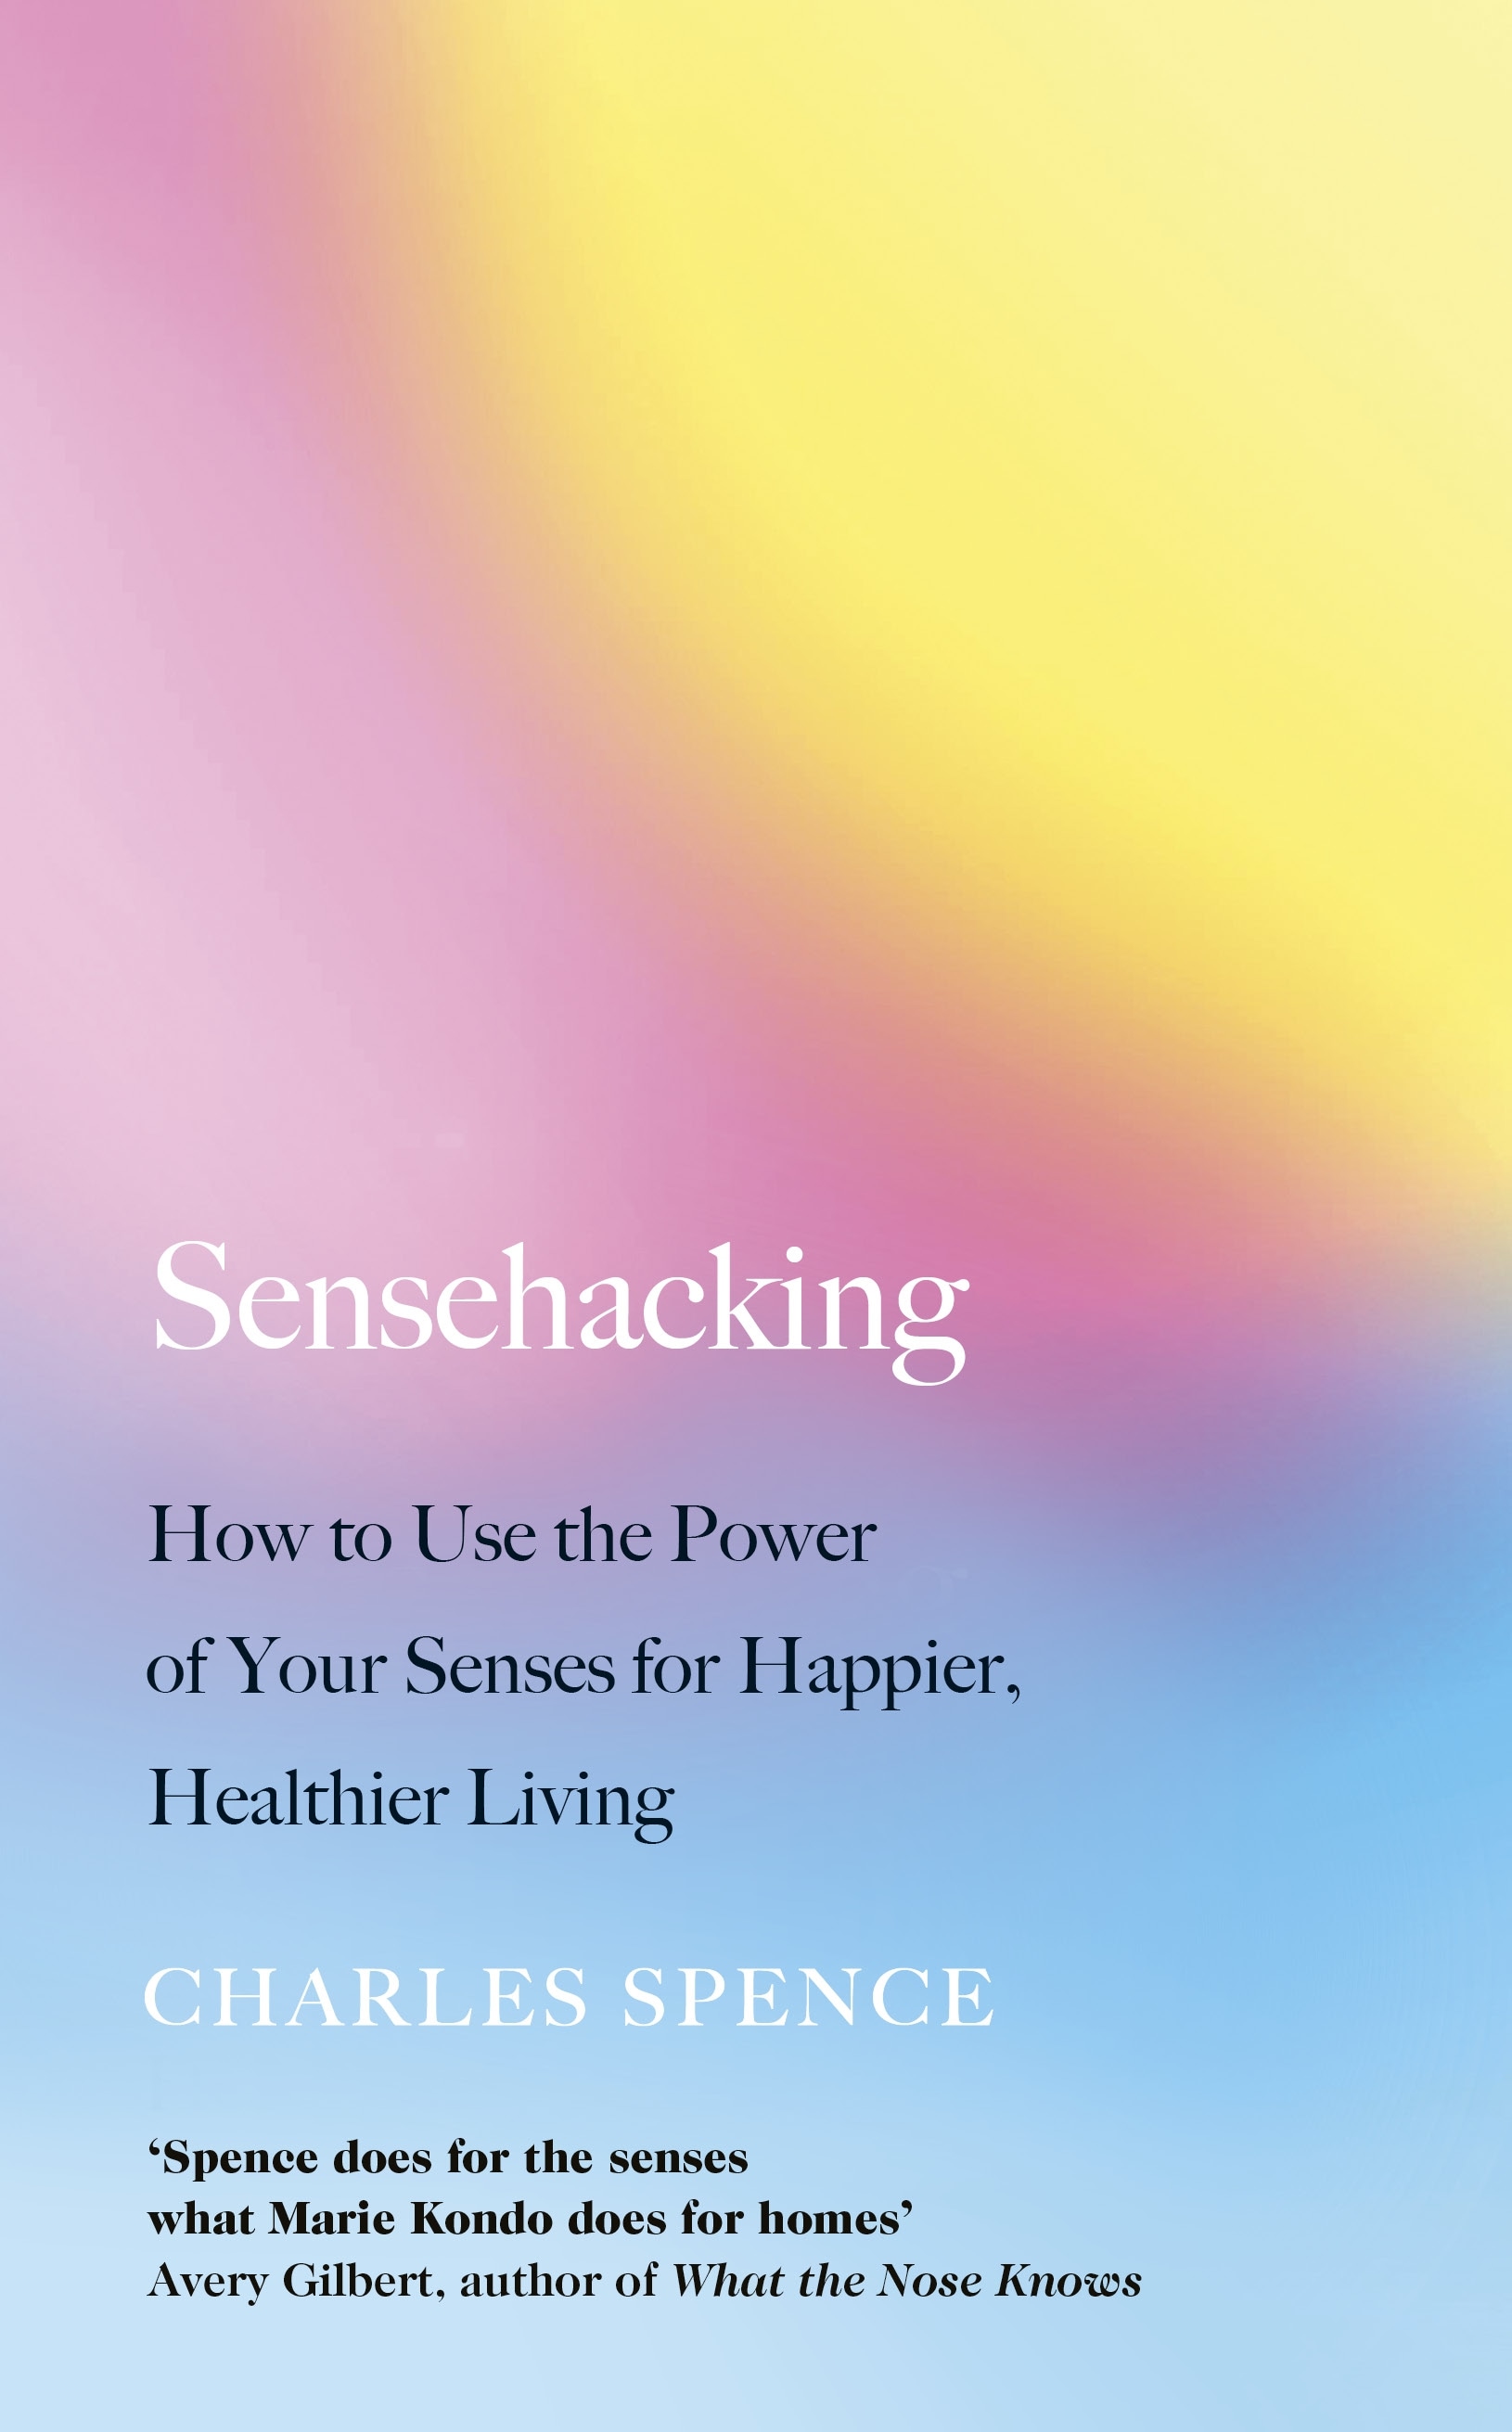 Book “Sensehacking” by Charles Spence — January 14, 2021